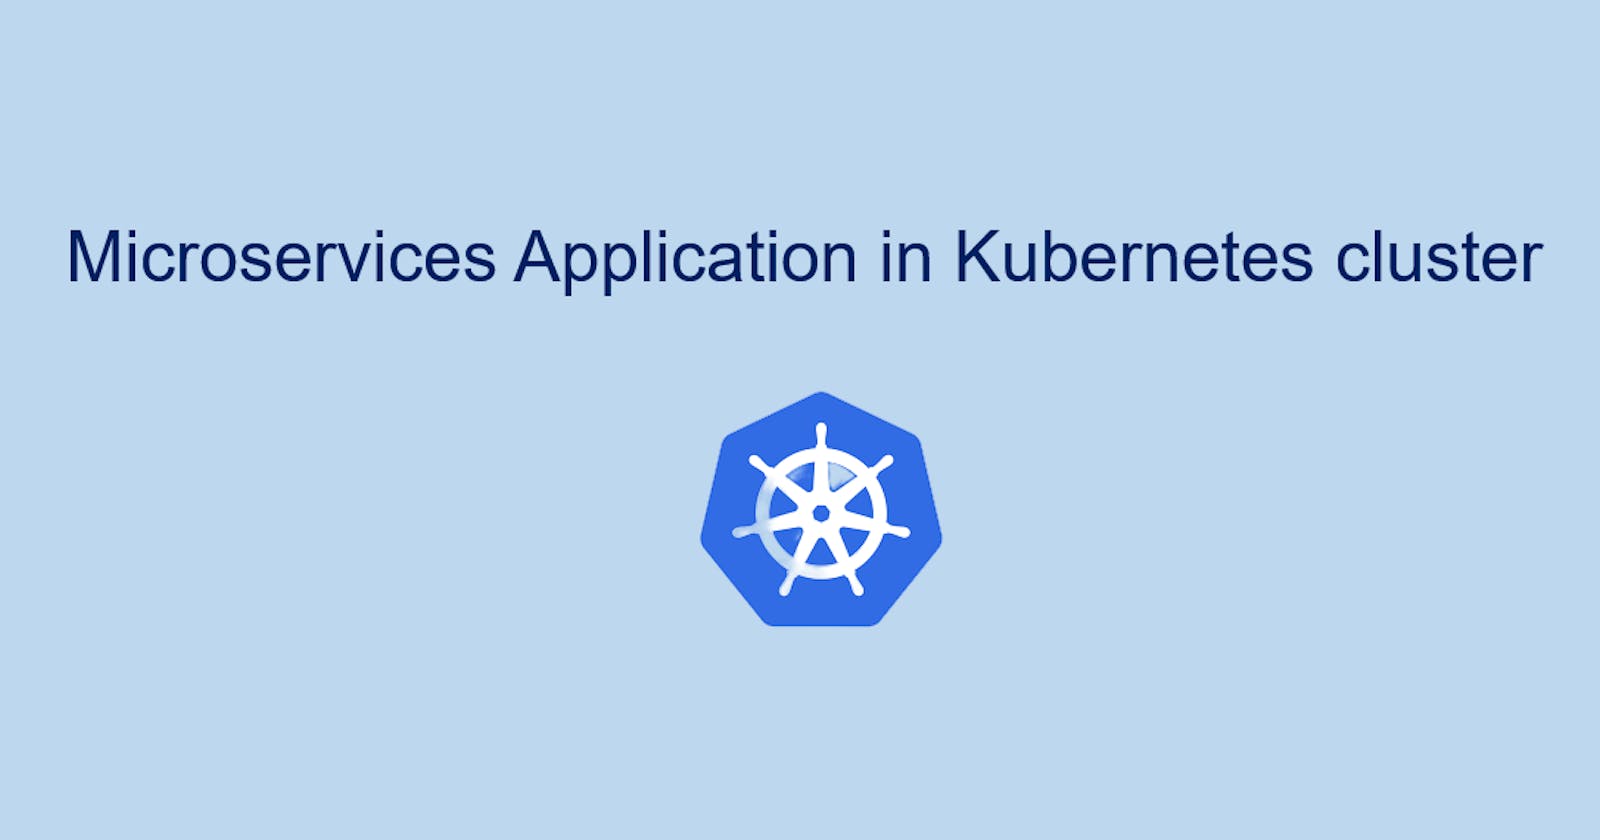 Microservices Application in Kubernetes cluster